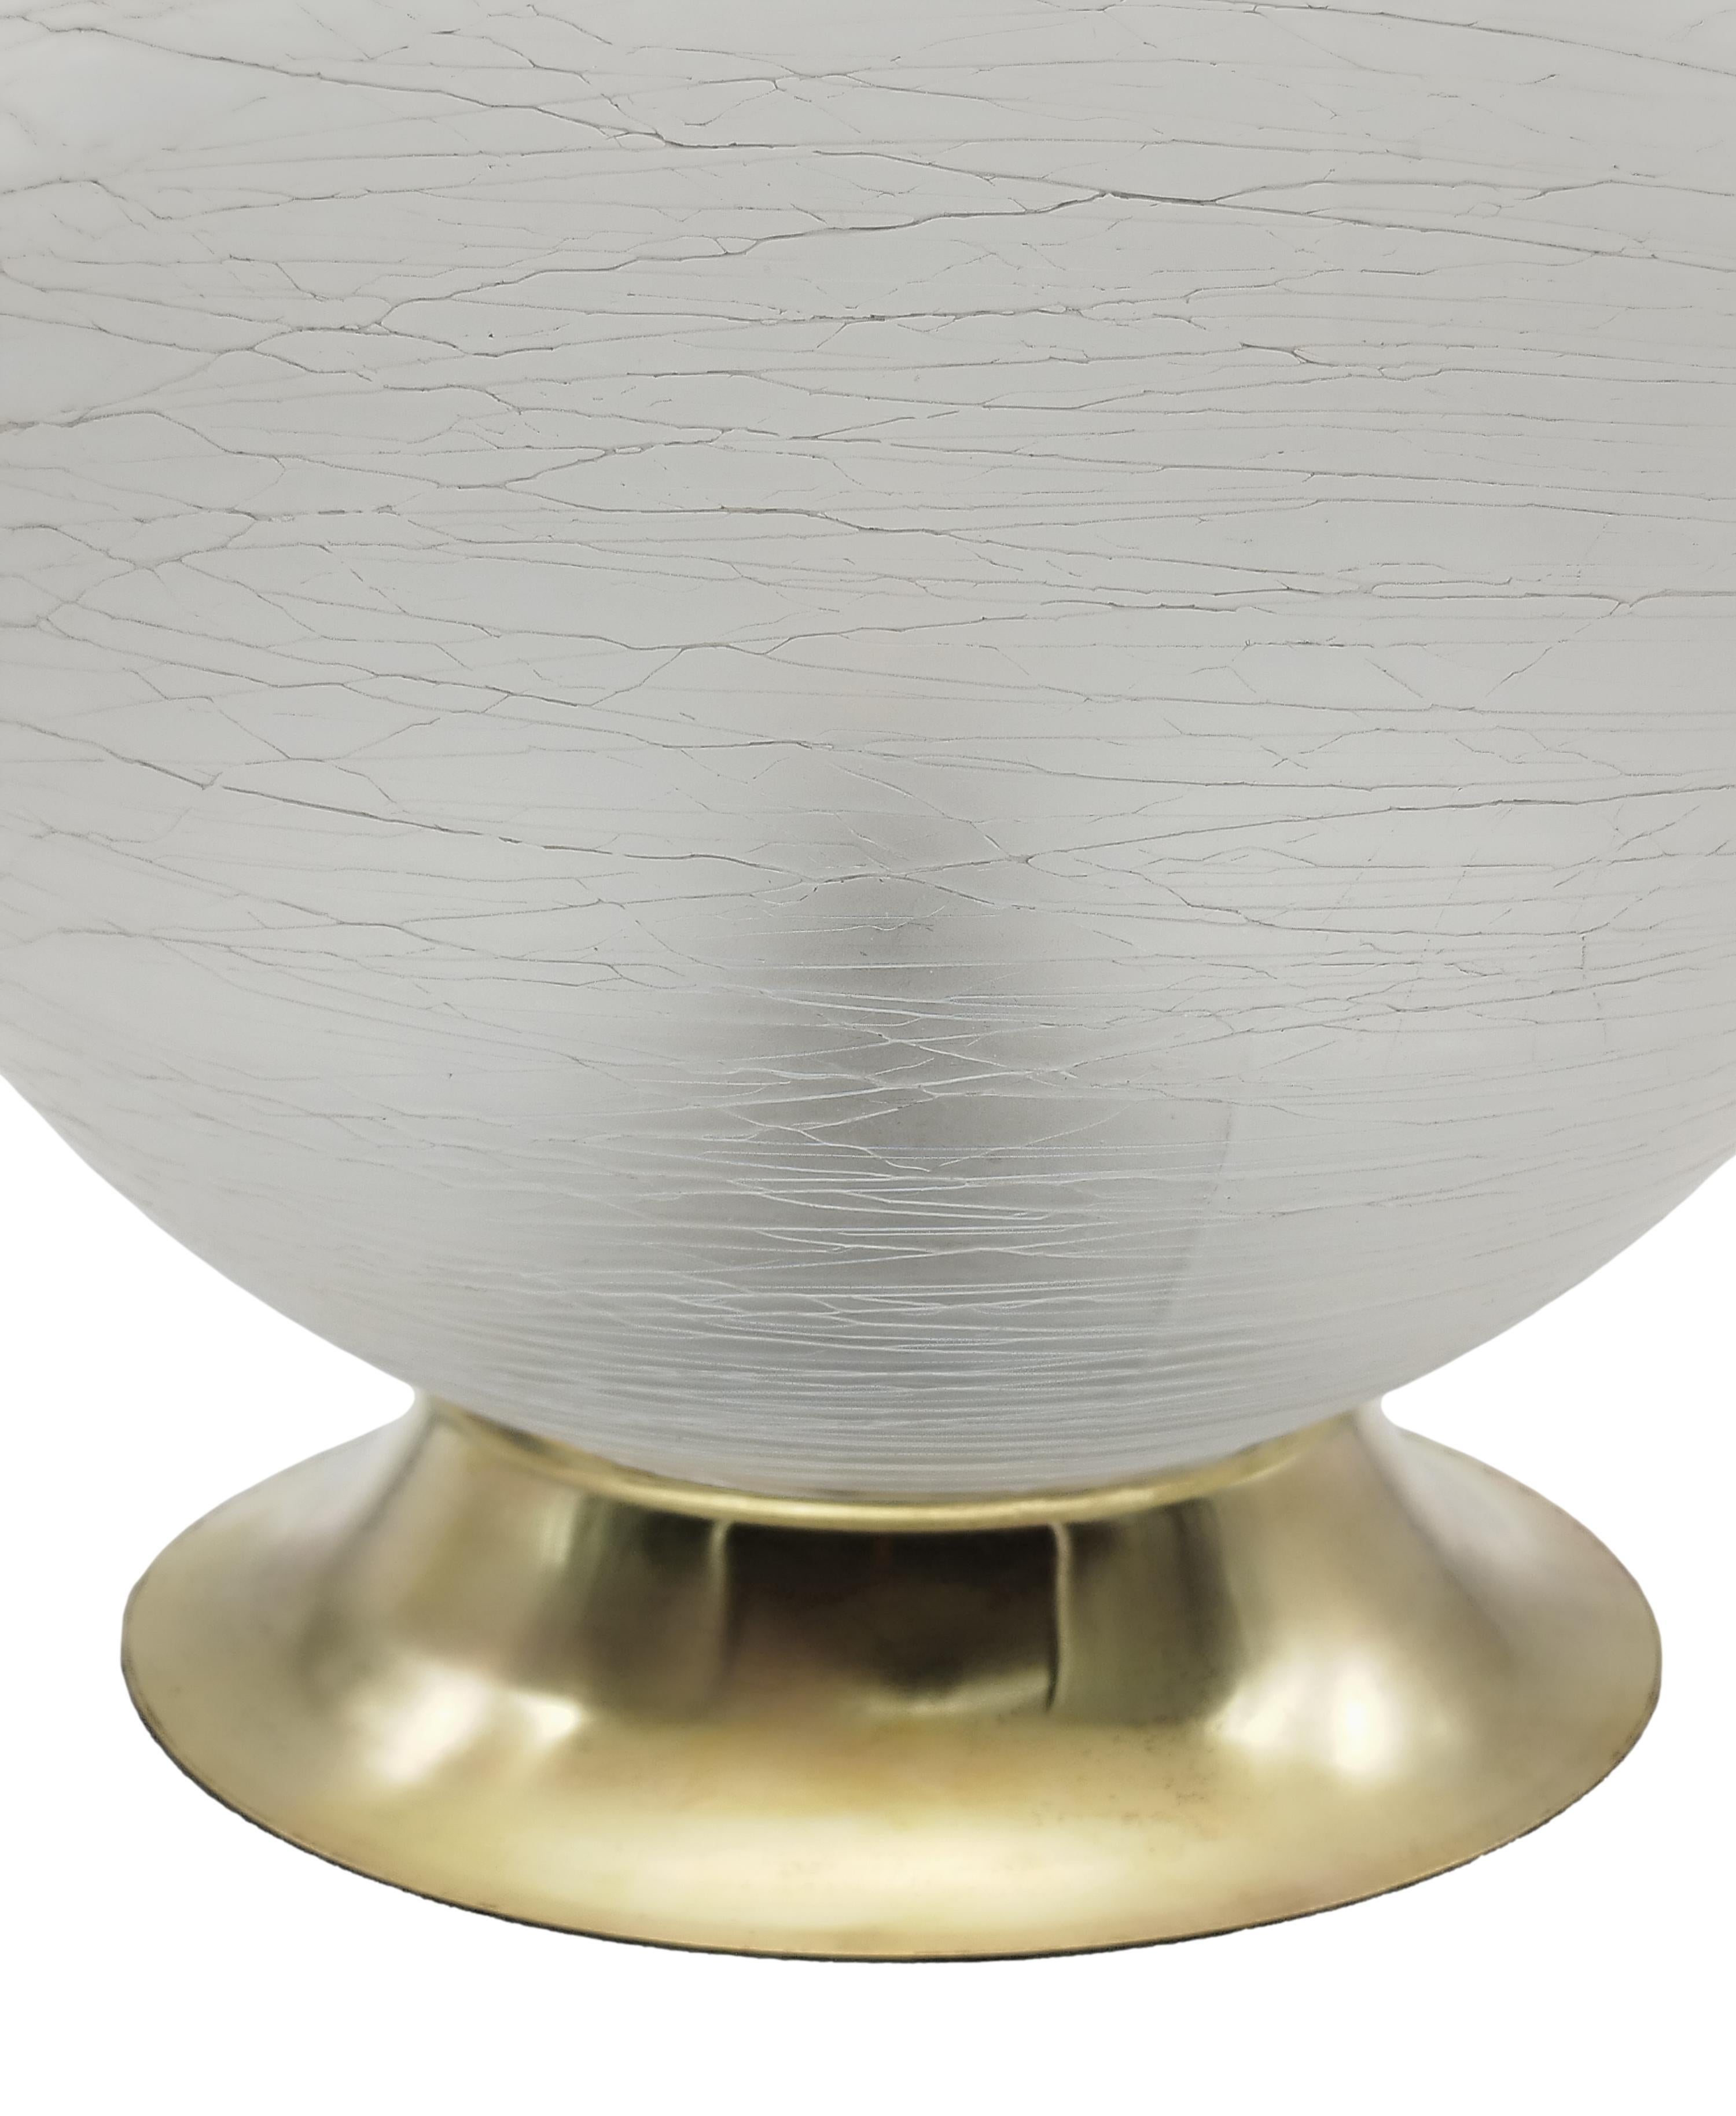 Murano glass craquele' effect ball lamp on brass base, in the style of Venini.